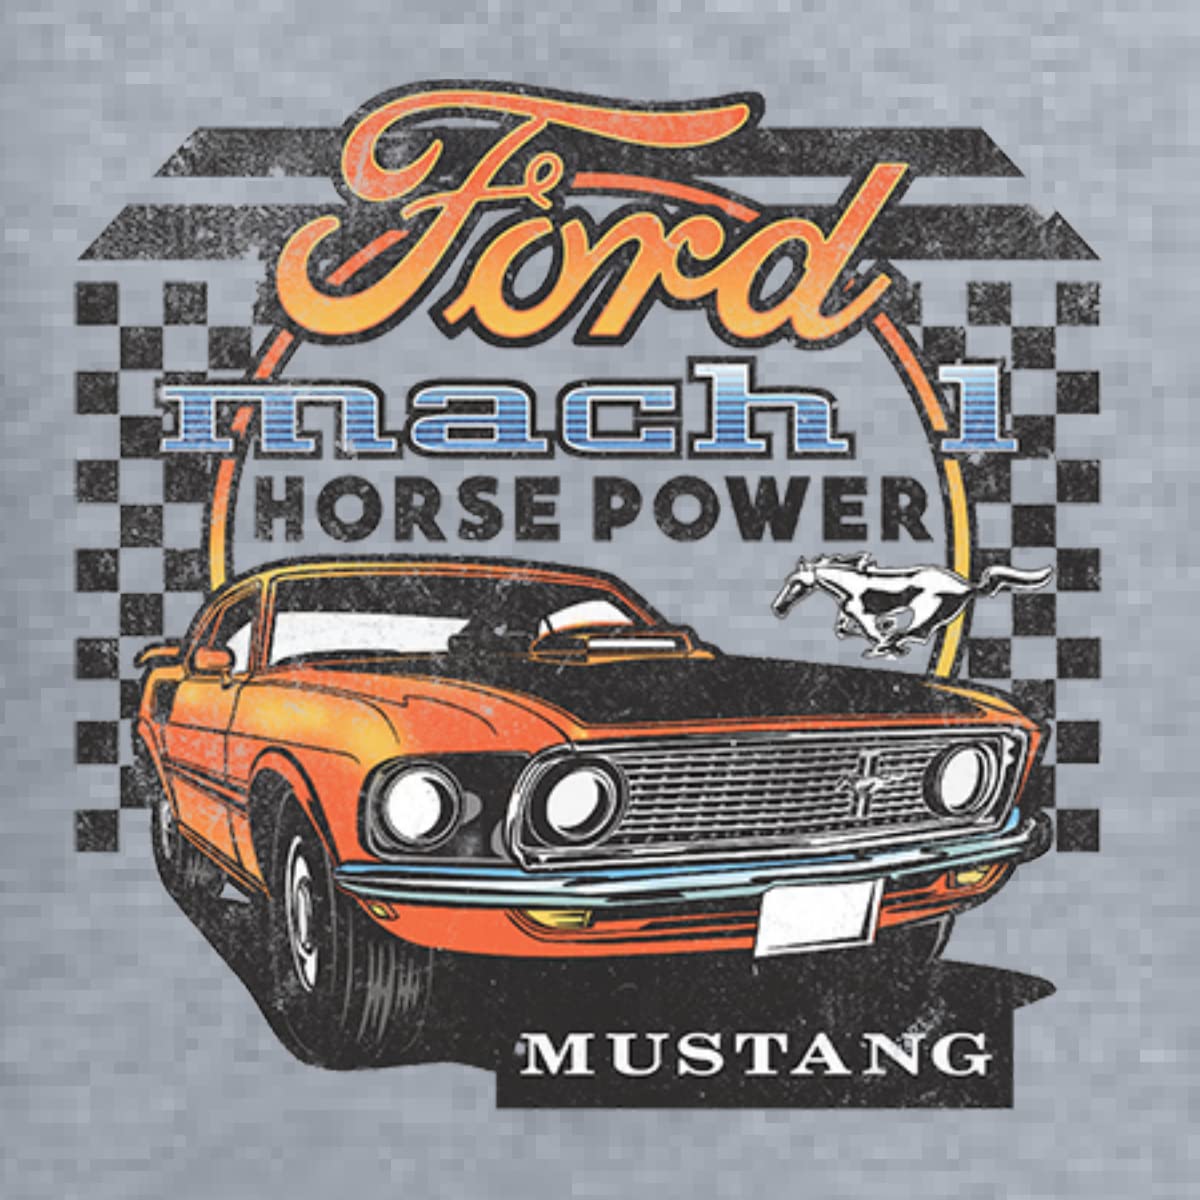 Ford Mustang Mach 1 Horse Power Classic Racing Cars and Trucks Men's Graphic T-Shirt, Heather Grey, 3X-Large